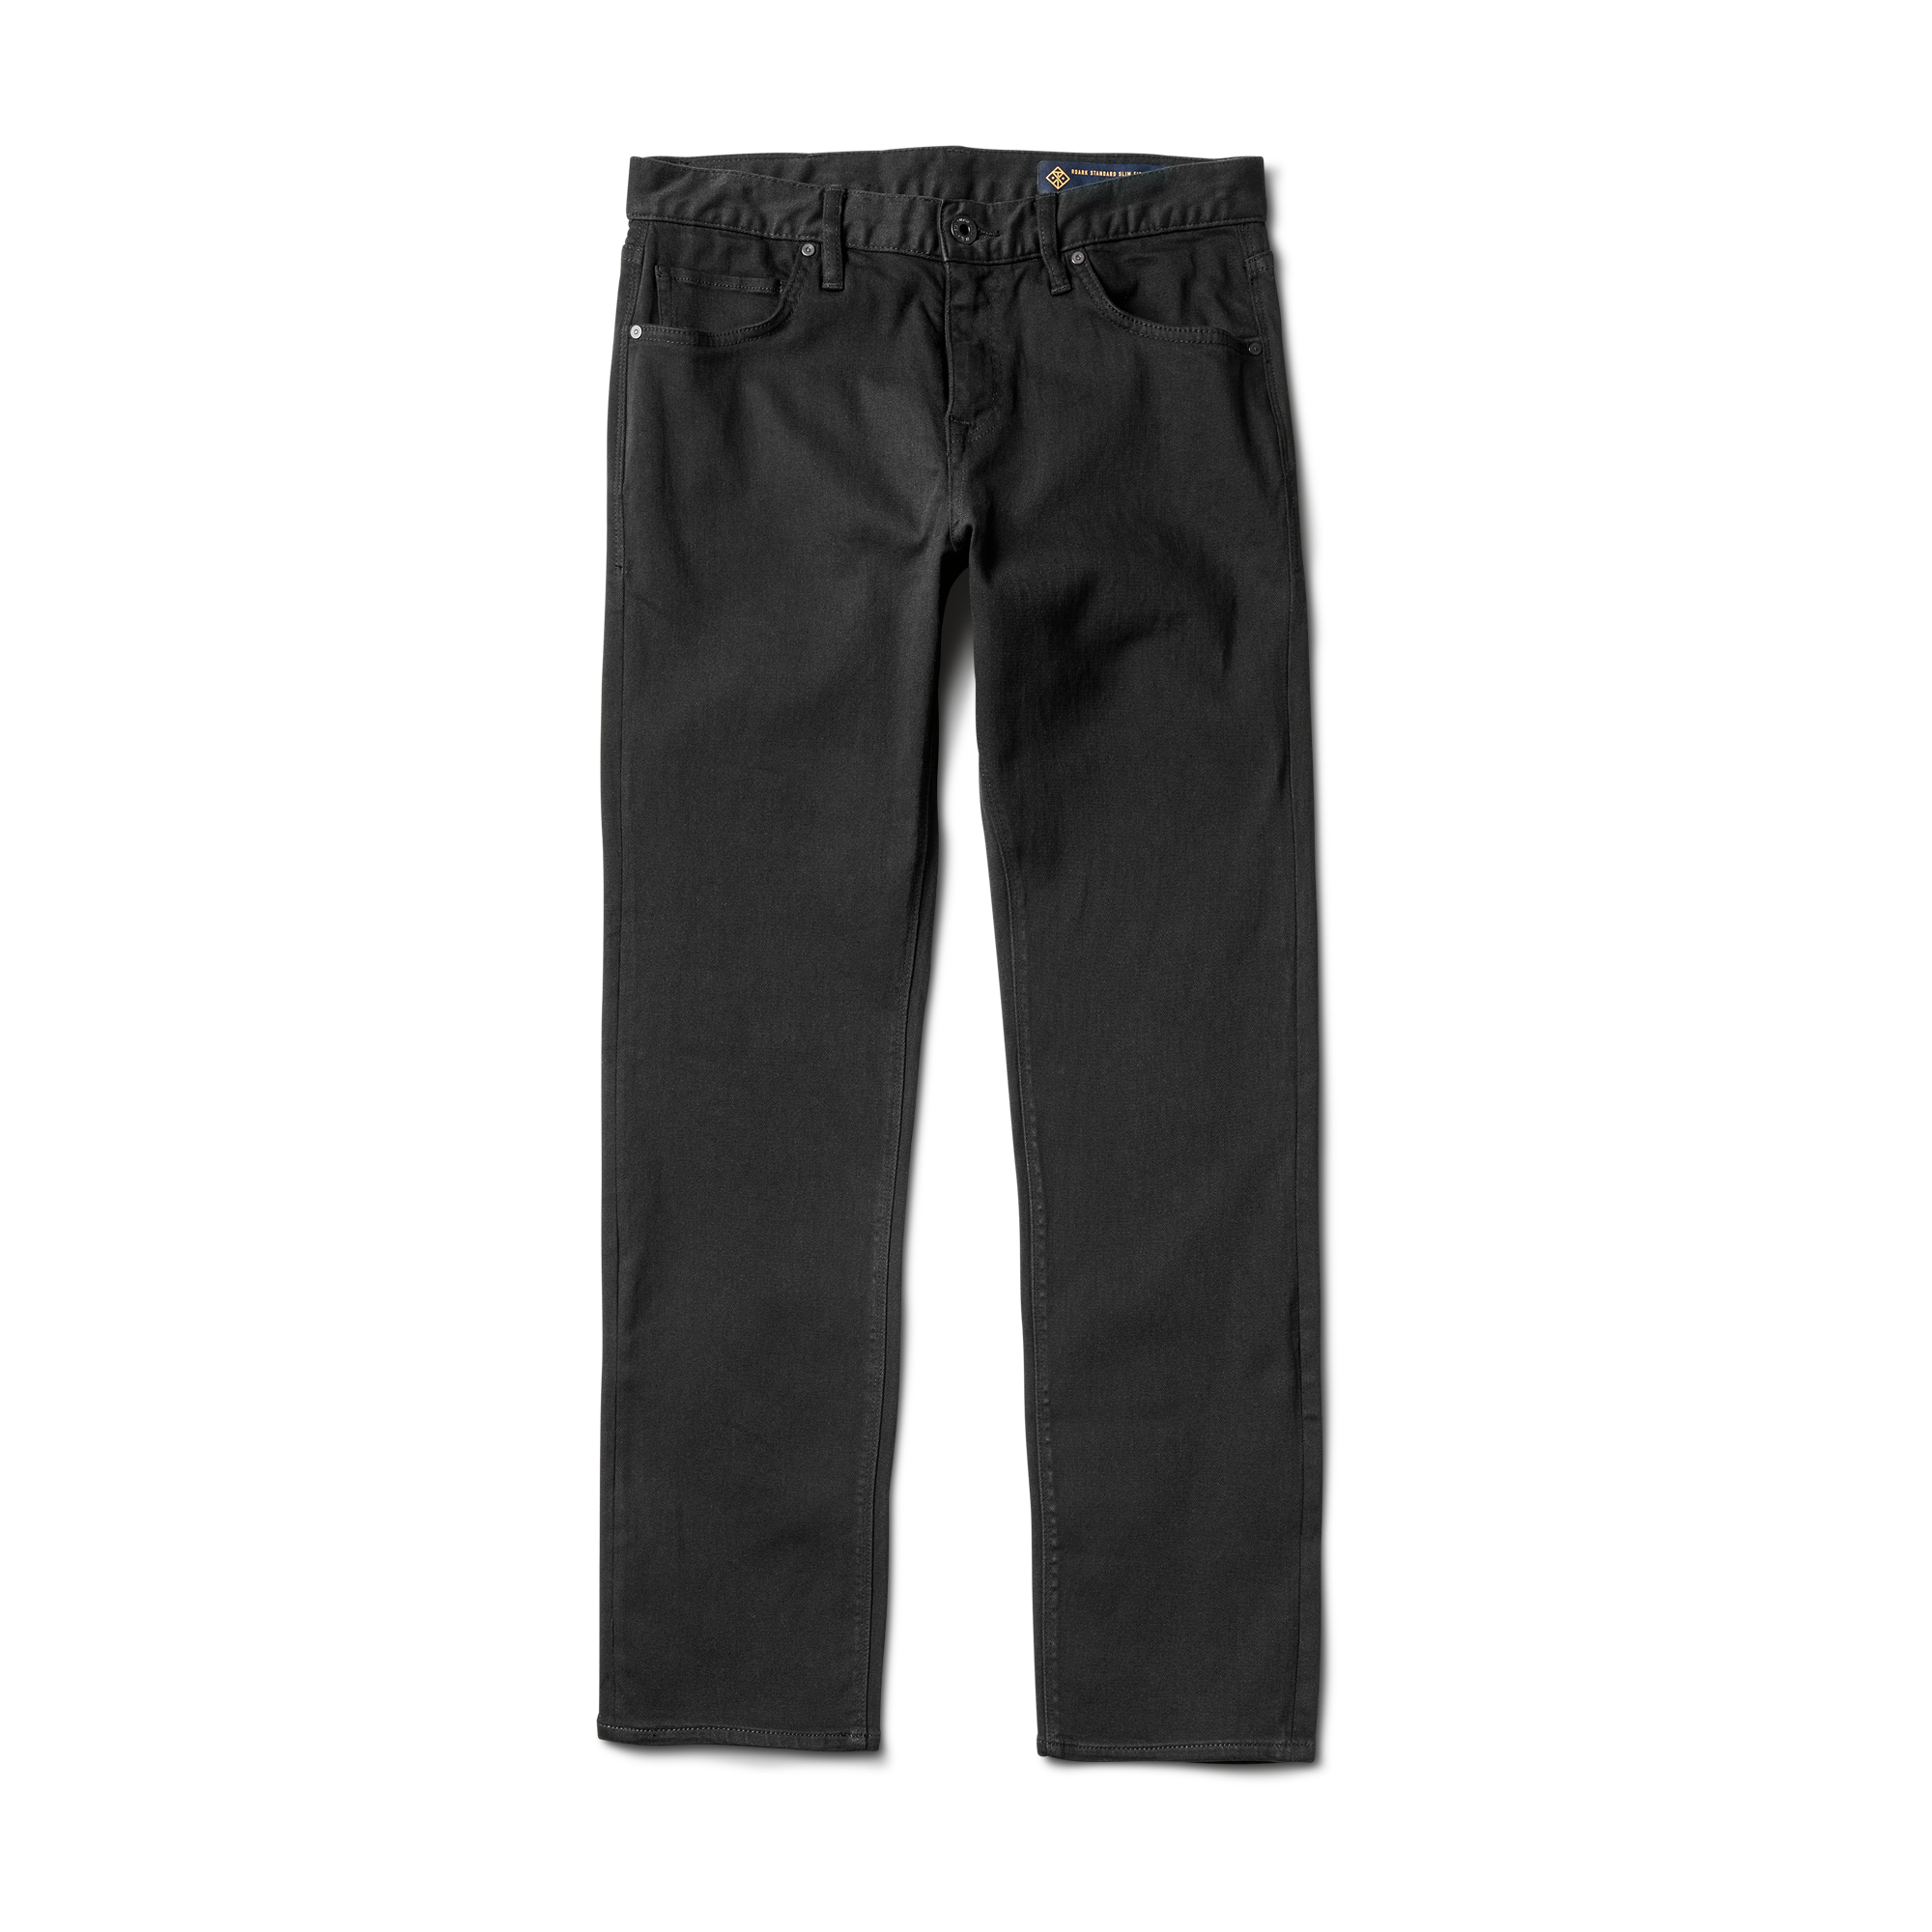 Athletic Works Gray Active Pants Size M - 26% off